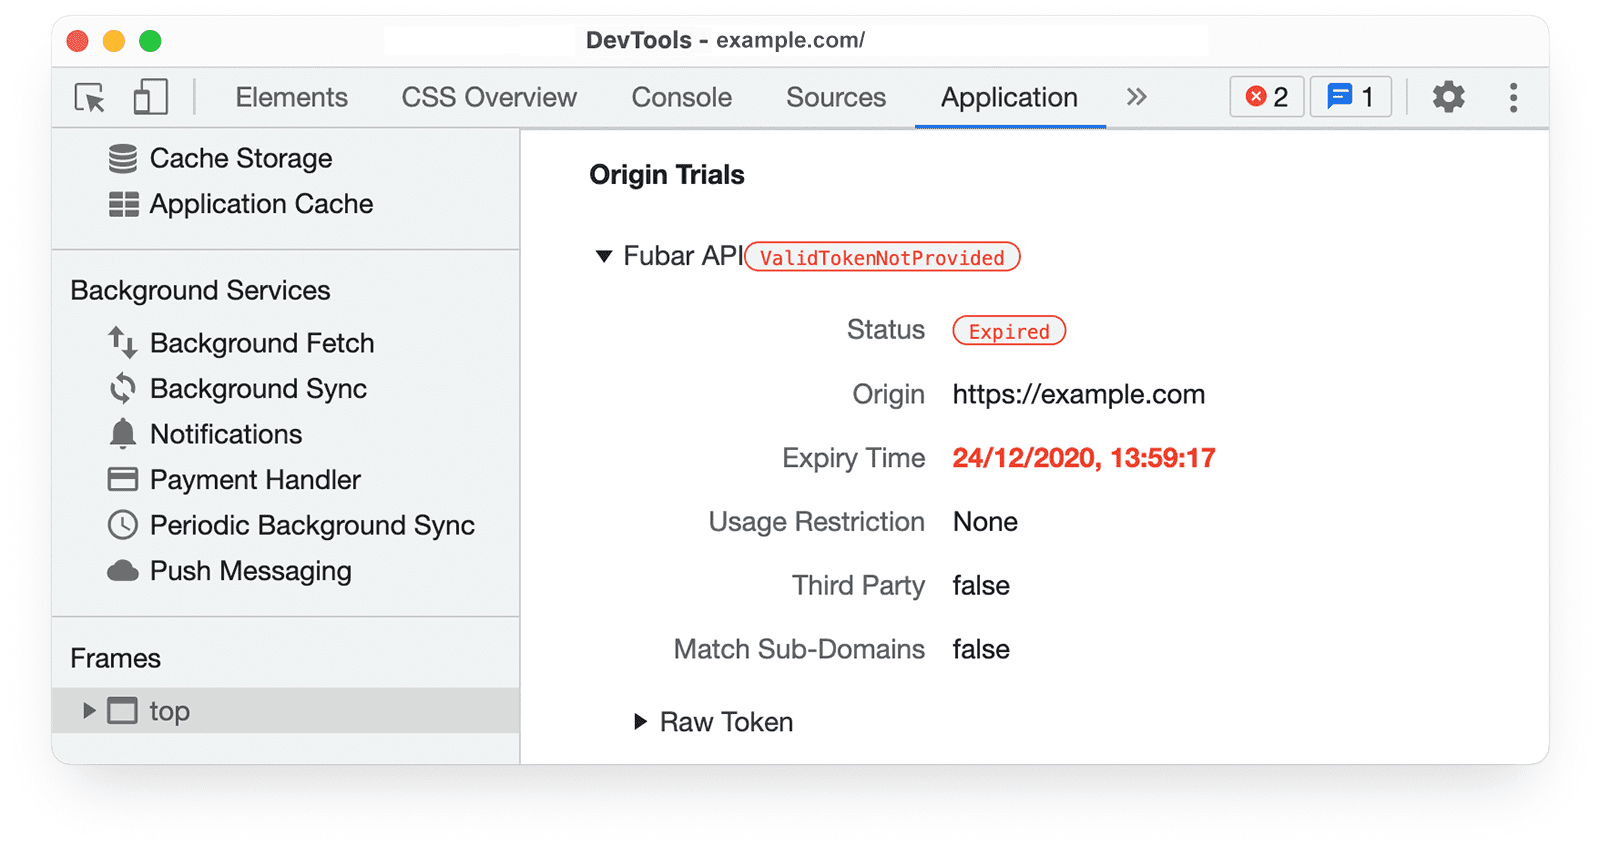 Chrome DevTools 
origin trials information in the Application panel showing expired token